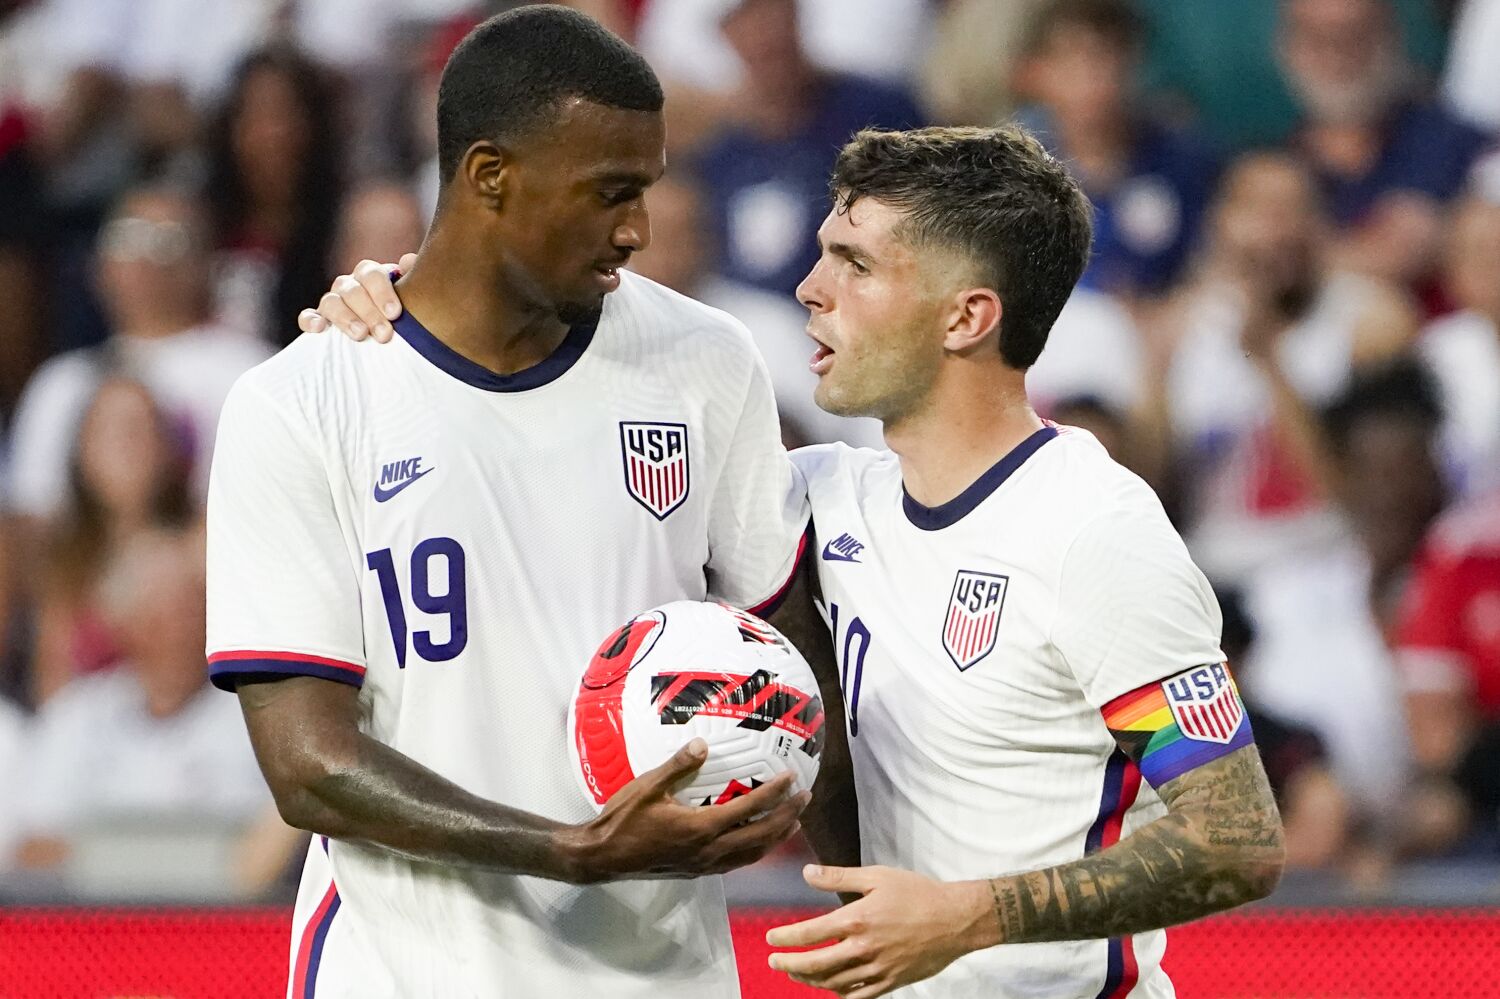 U.S. men's soccer embracing 'Be the Change' mantra ahead of controversial World Cup